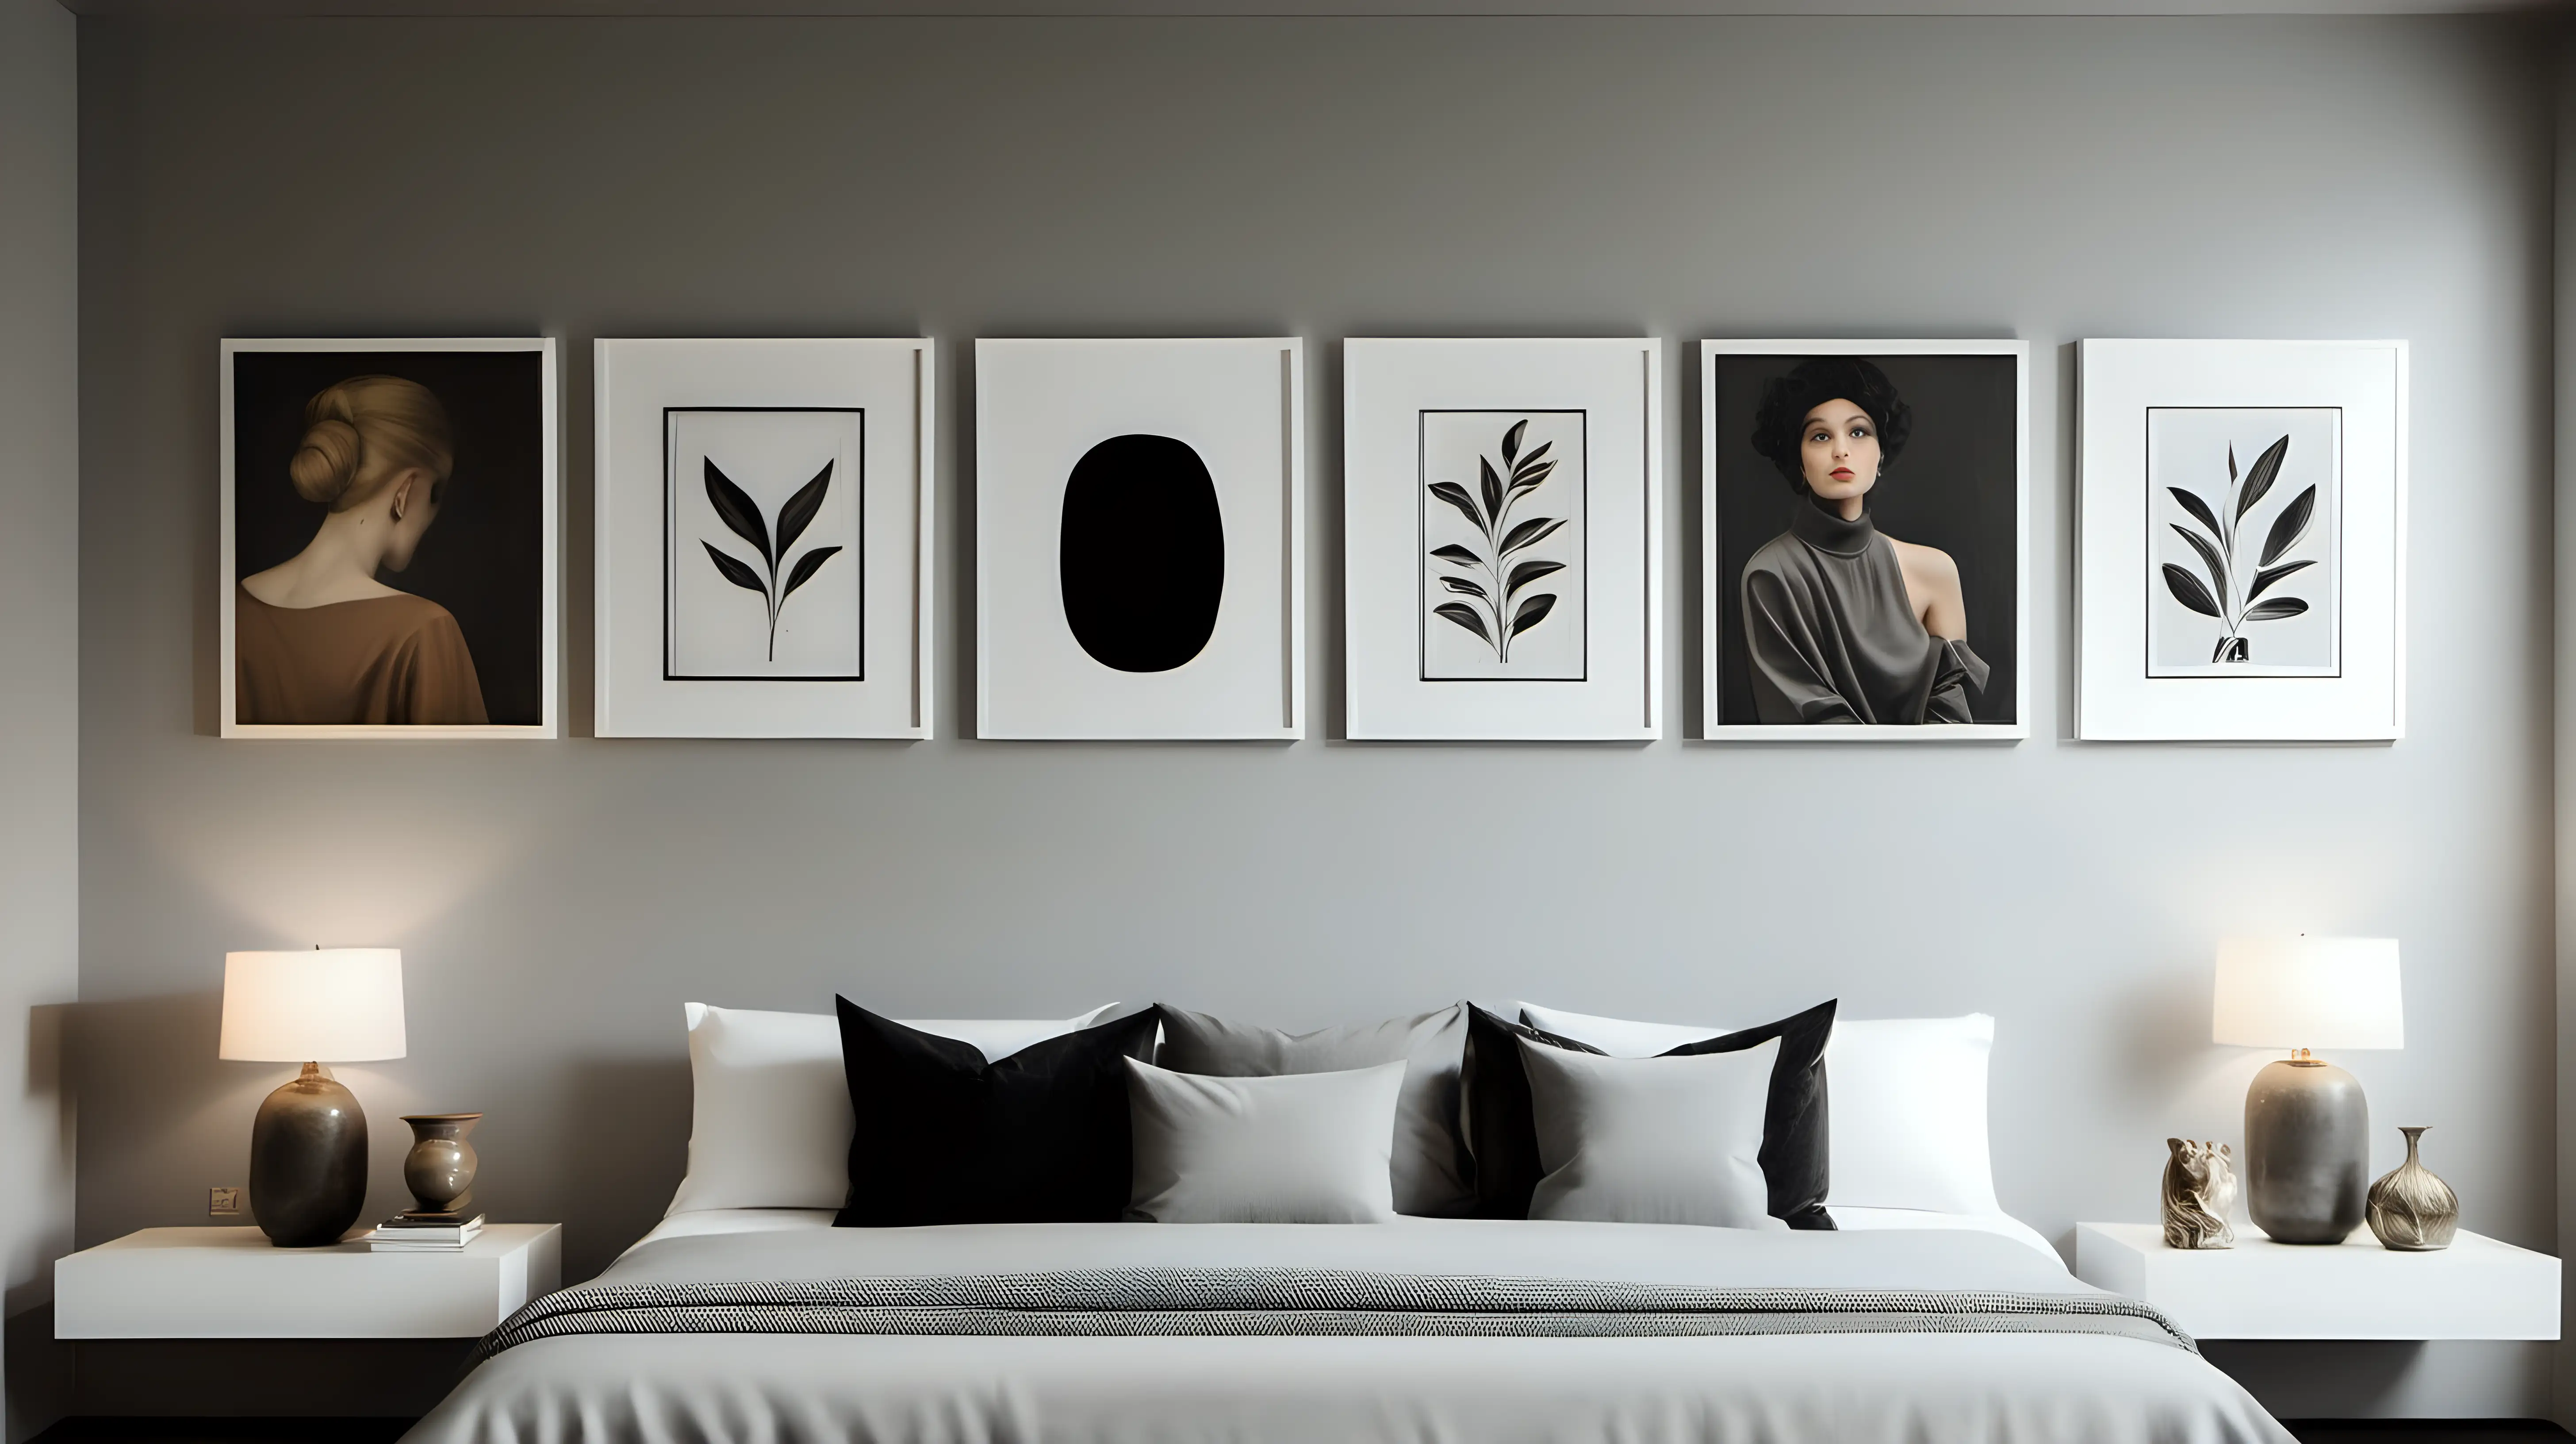 Elegantly Designed Room with Five Artful Paintings